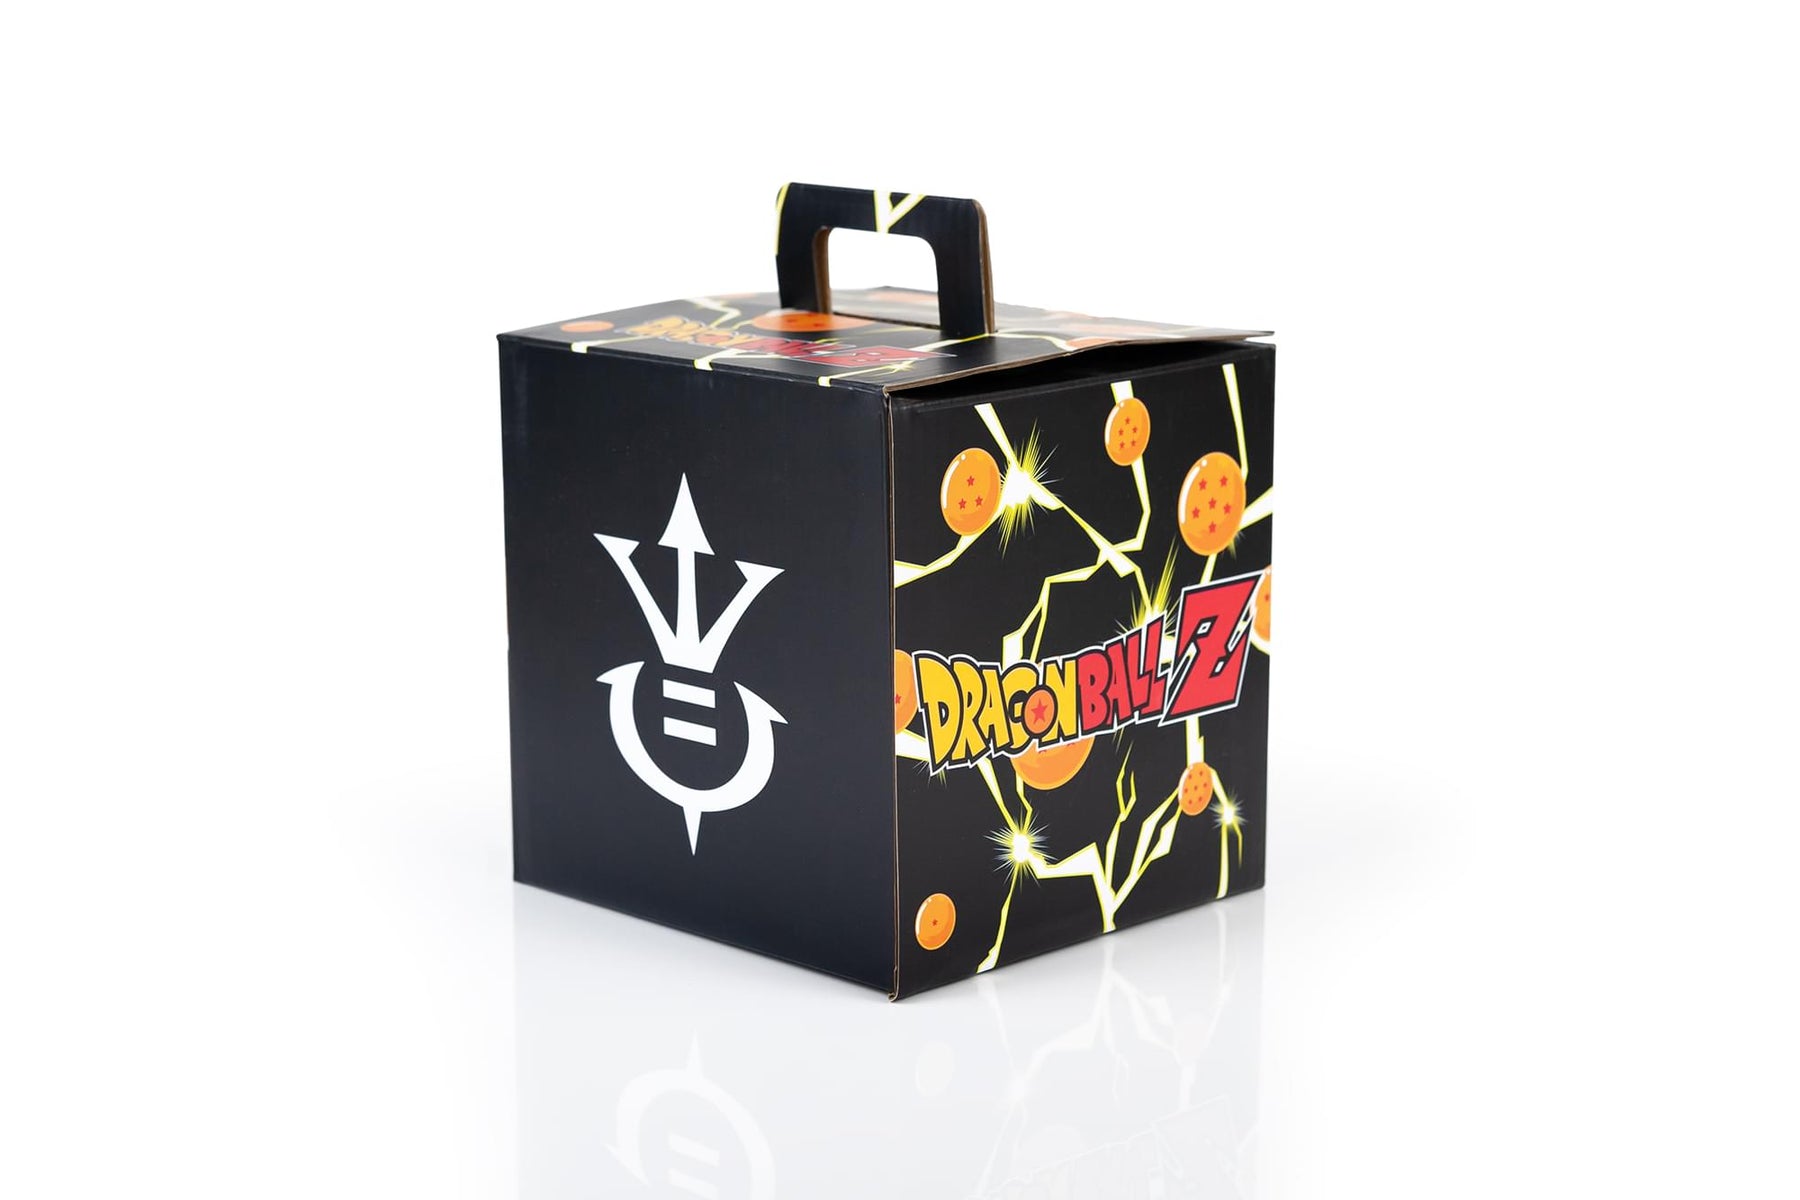 Dragon Ball Z Vegeta Collector Looksee Box | Includes 5 Themed Collectibles